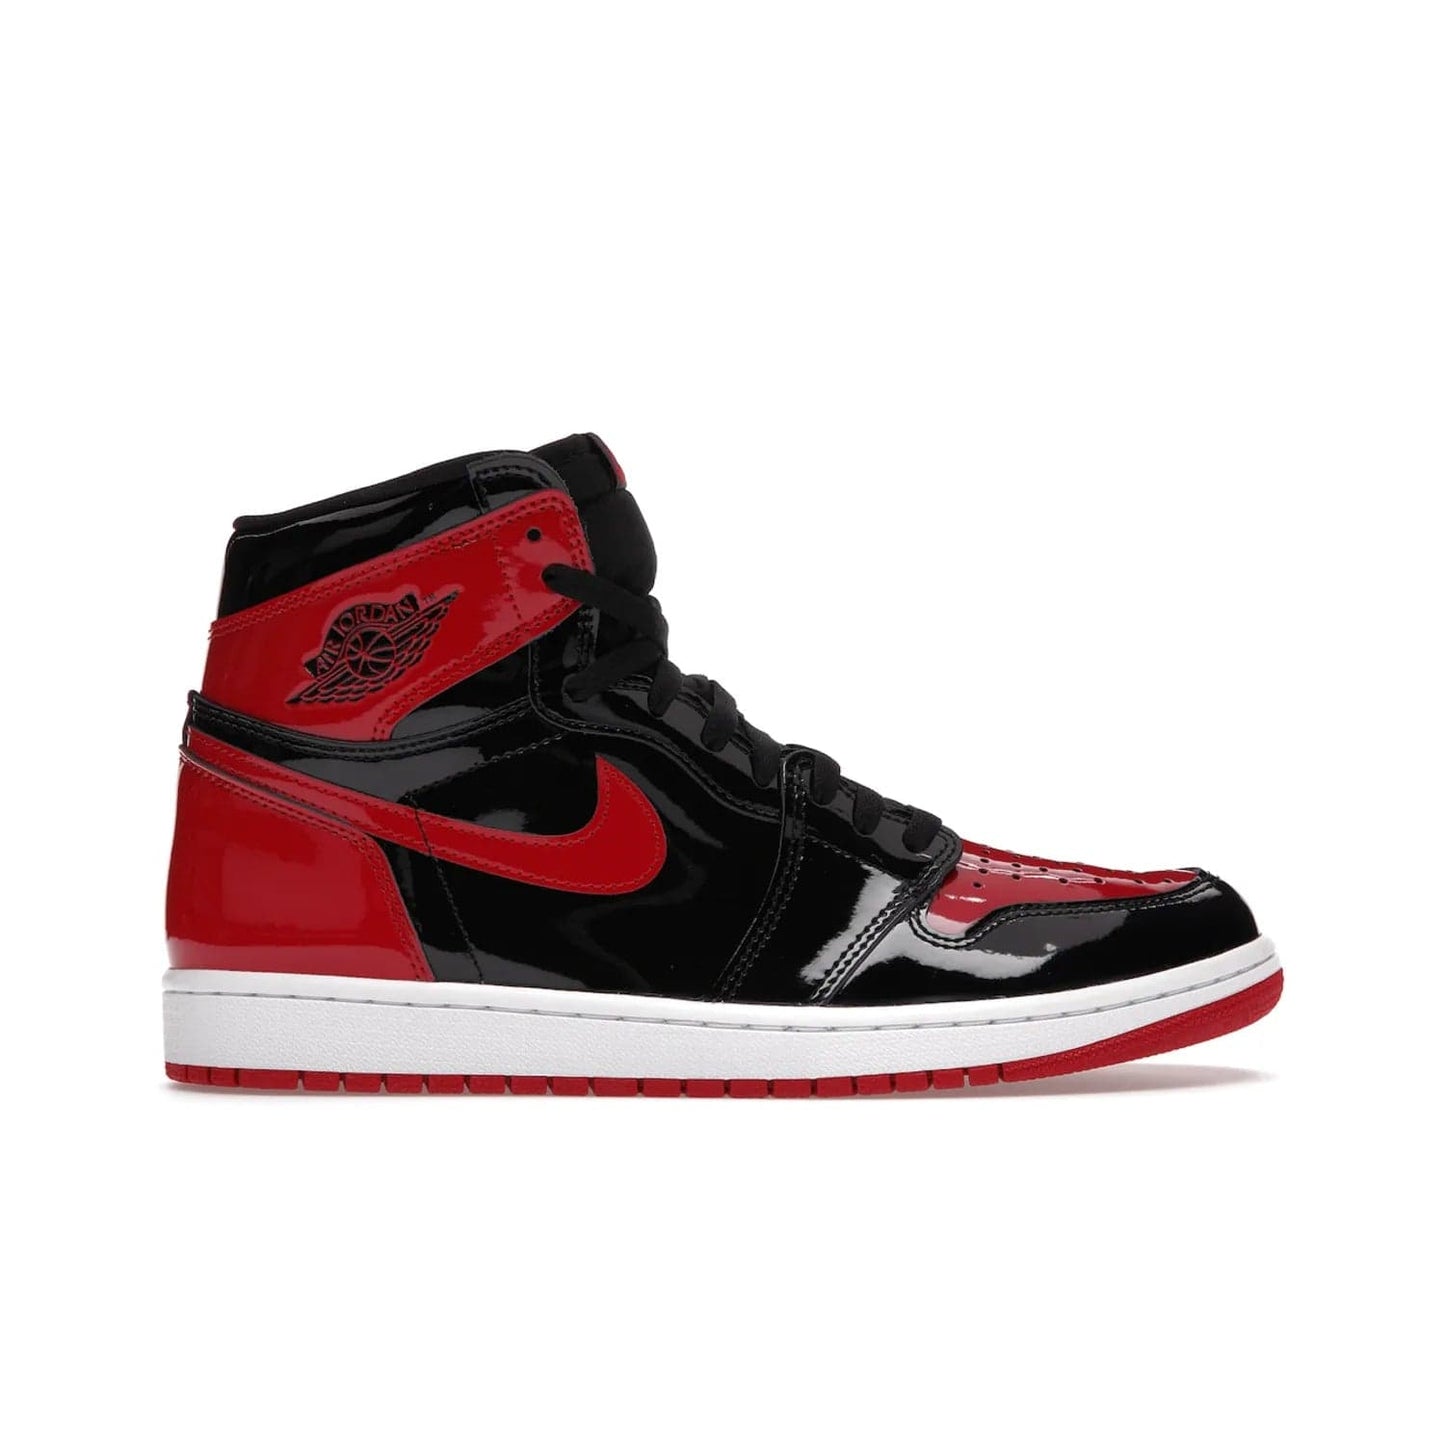 Jordan 1 Retro High OG Patent Bred - Image 1 - Only at www.BallersClubKickz.com - Introducing Air Jordan 1 Retro High OG Patent Bred - sleek patent leather upper, signature weaved Nike Air tongue and classic Wings logo on collar. Red and white sole complete signature look. Releasing December 2021 - perfect retro edition for holidays.